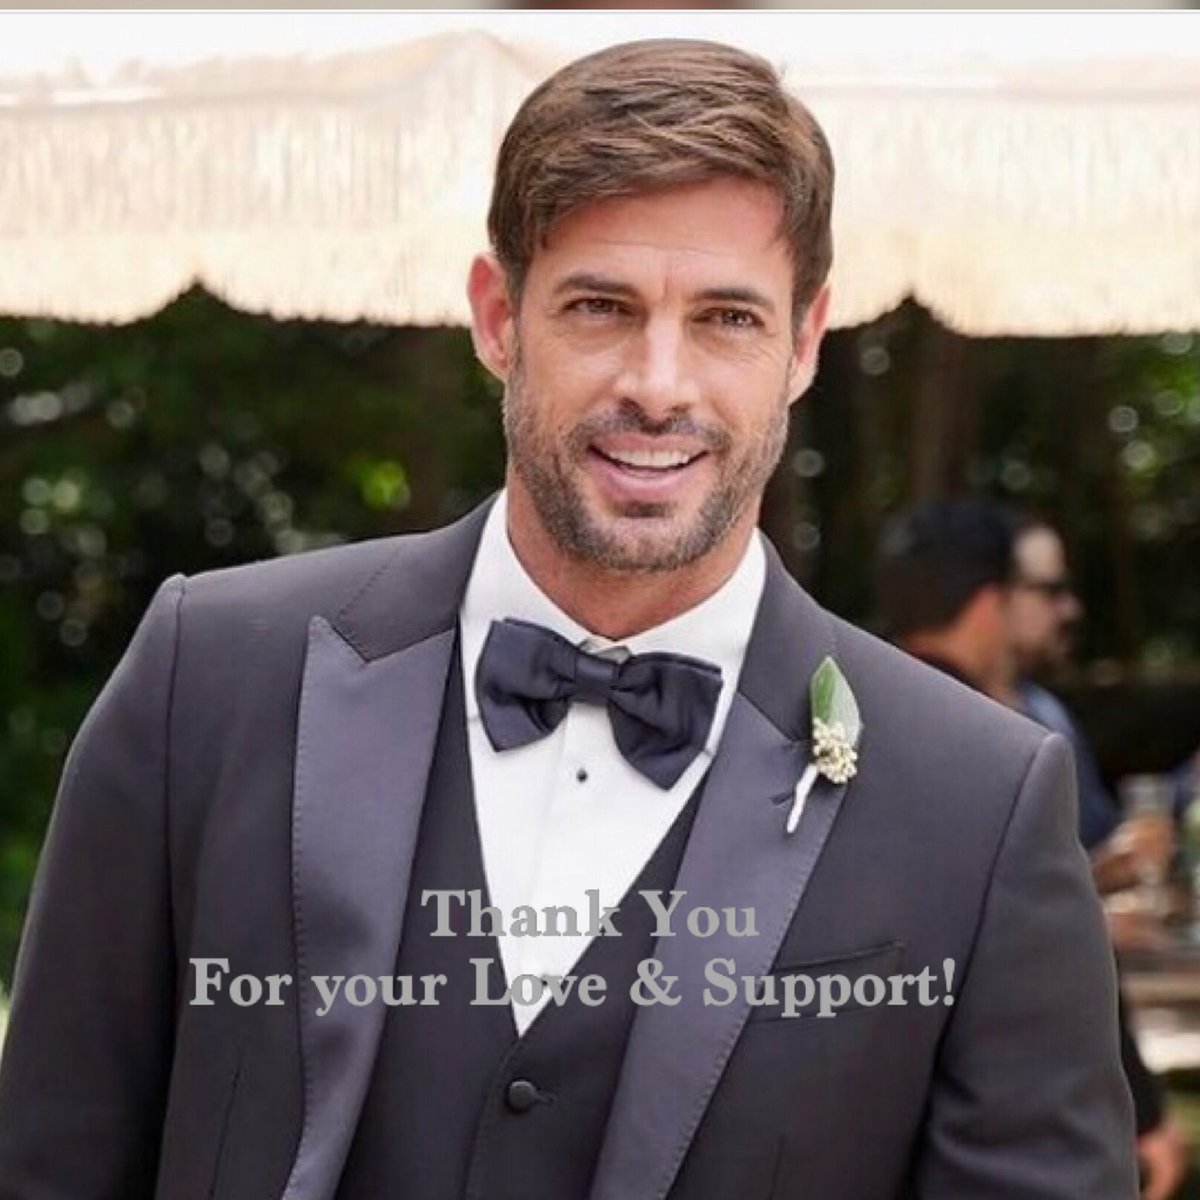 Thank You to all the #LevyFans around the World for all your Love & Support you give @willylevy29 ! 
A warm welcome to all our new followers!
#💯%BestFansInTheWorld 
#💯%BestFanClubInTheWorld